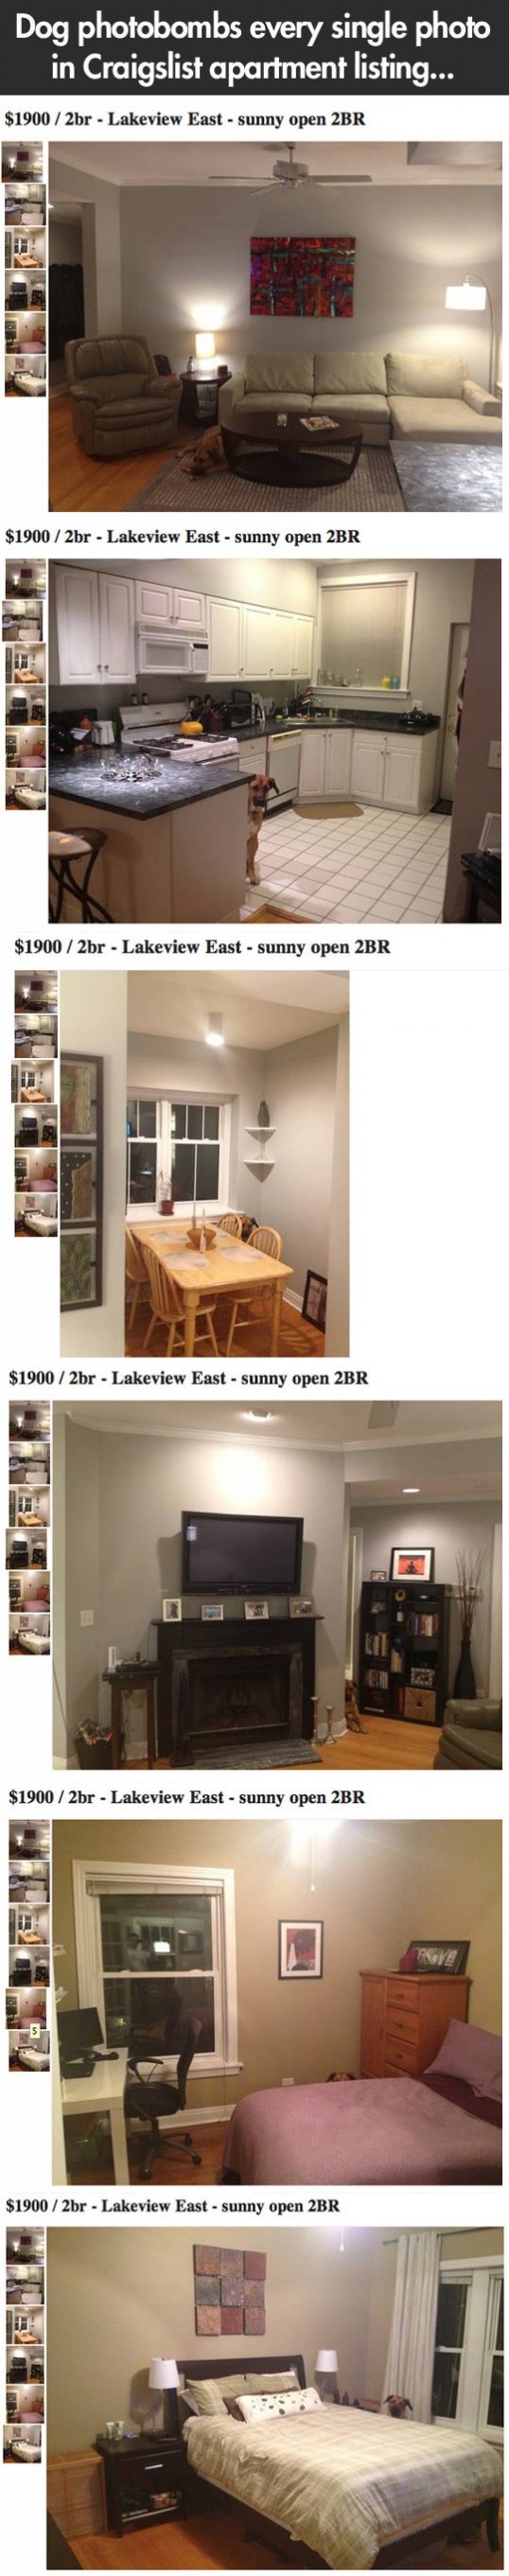 Dog-photo-bombs-every-single-photo-in-Craigslist-apartment-listing-…